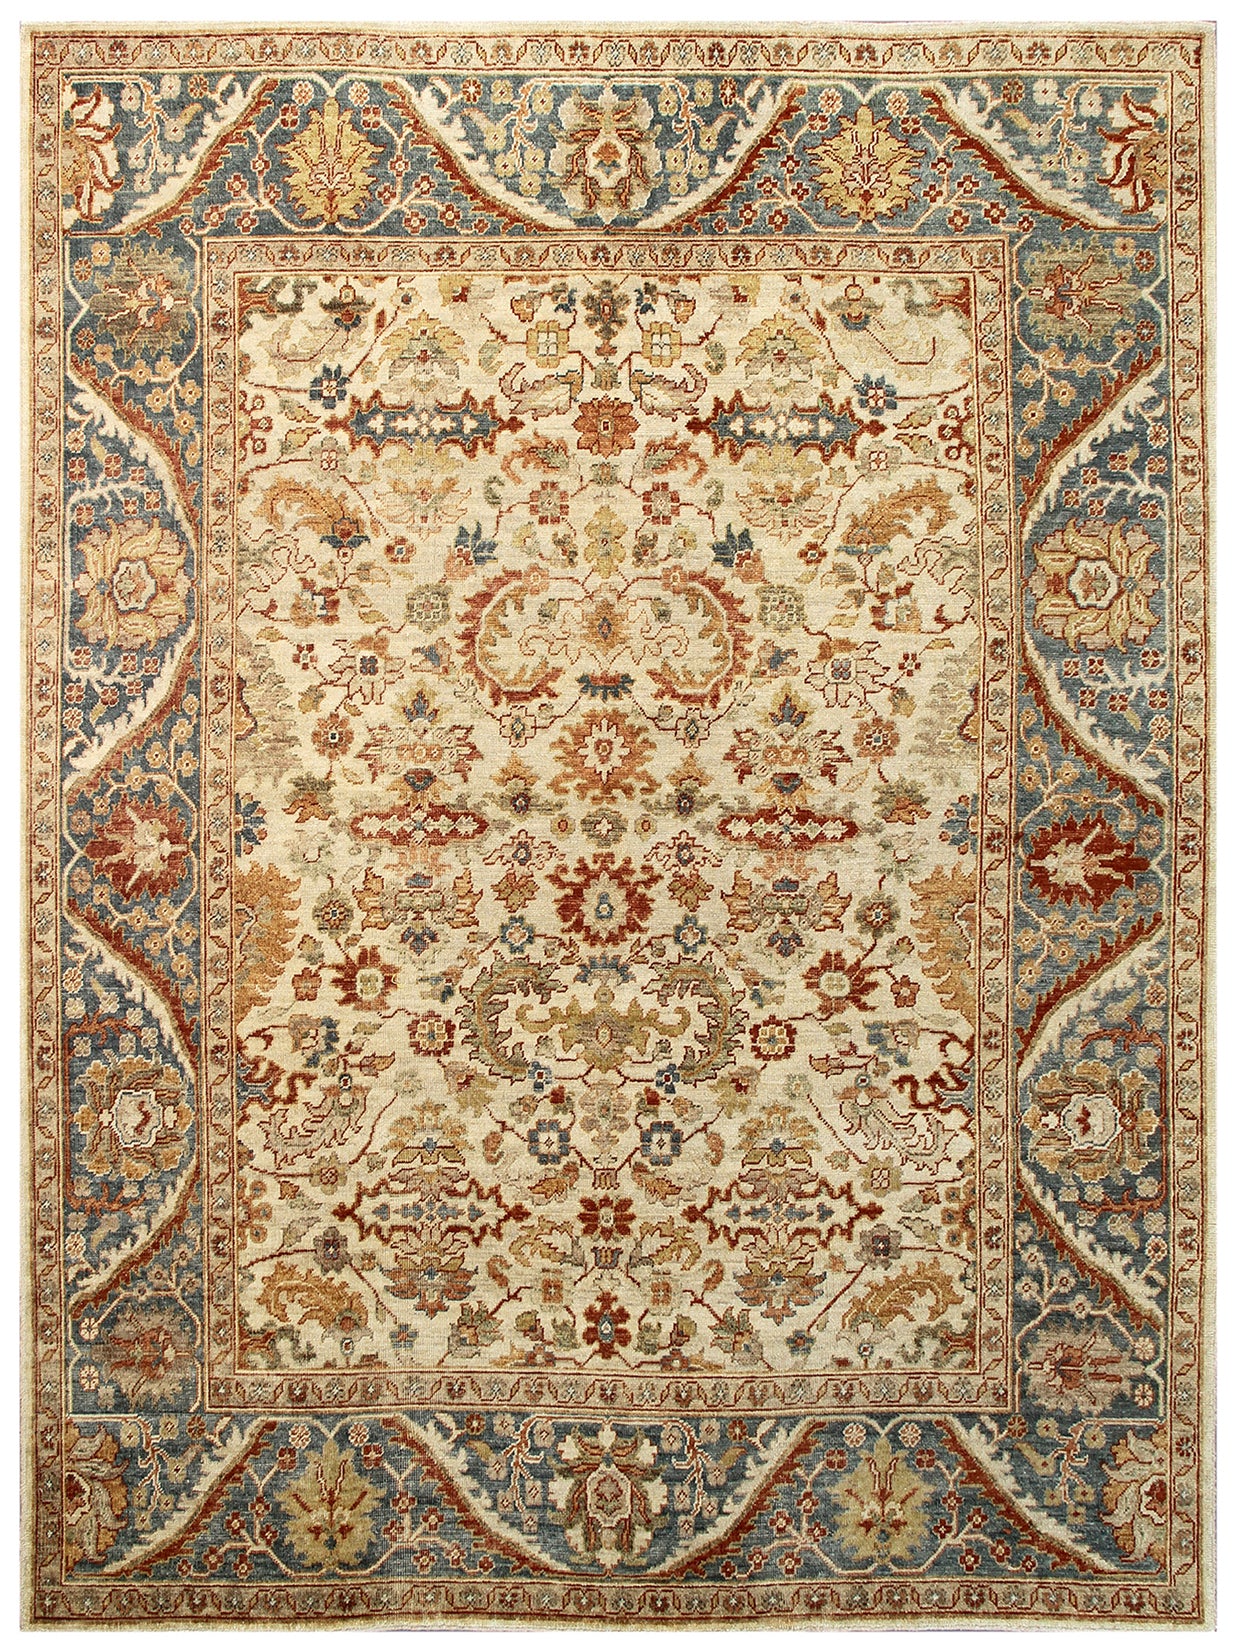 9.11 x  8.01 Zigler Sultan Abad Design New Hand-Knotted Area Rug